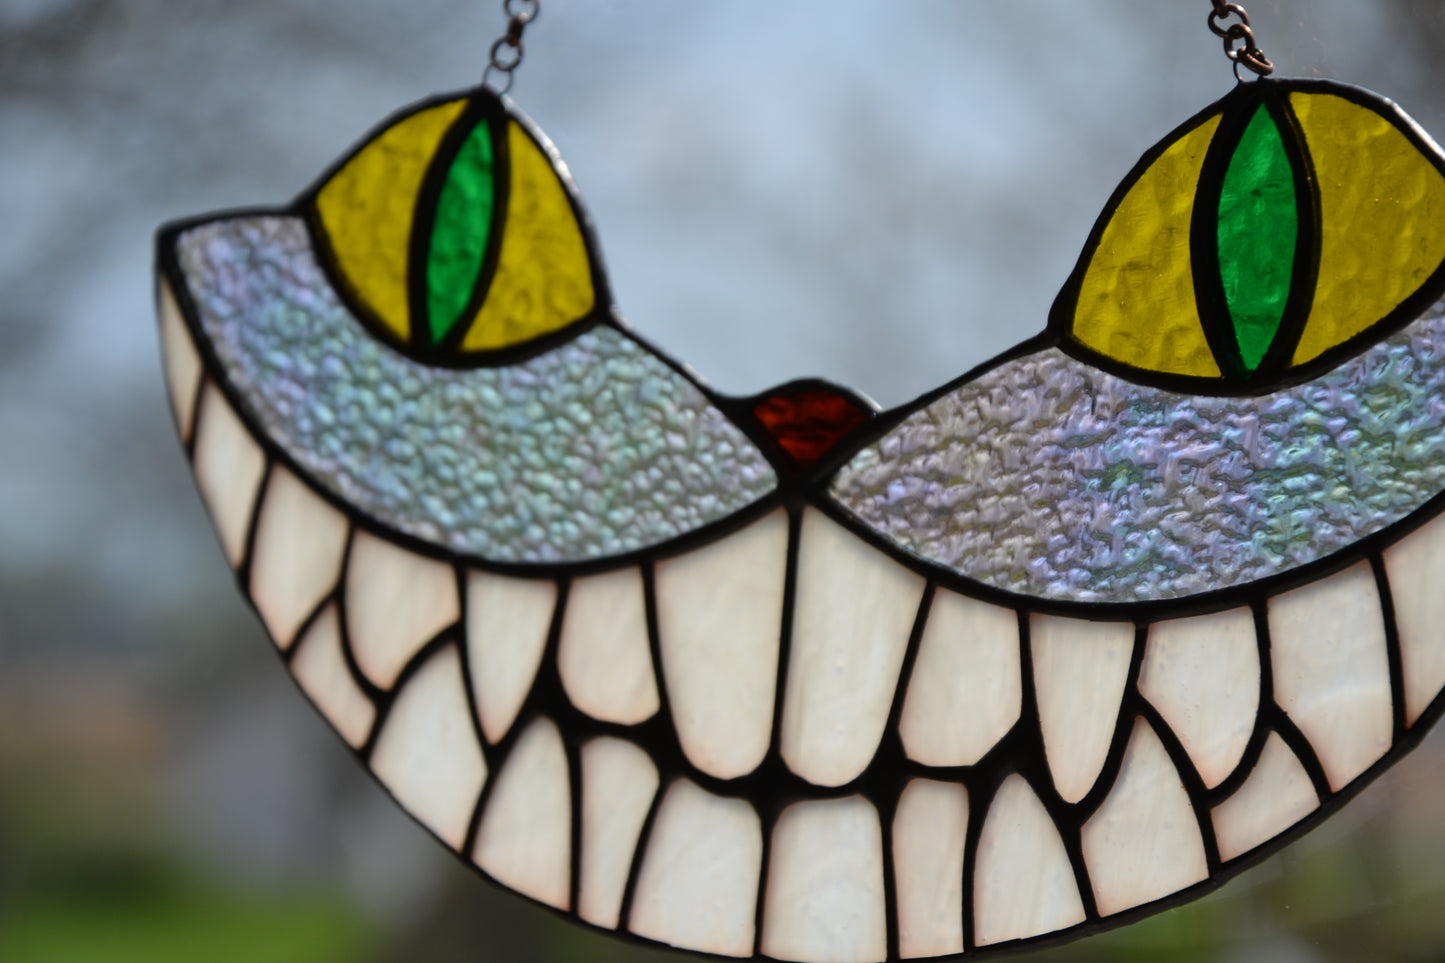 Cheshire Cat Suncatcher Stained glass window hanging Alice in the Wonderland Stained glass window Wall art hanging Gift idea Garden decor  Christmas gift